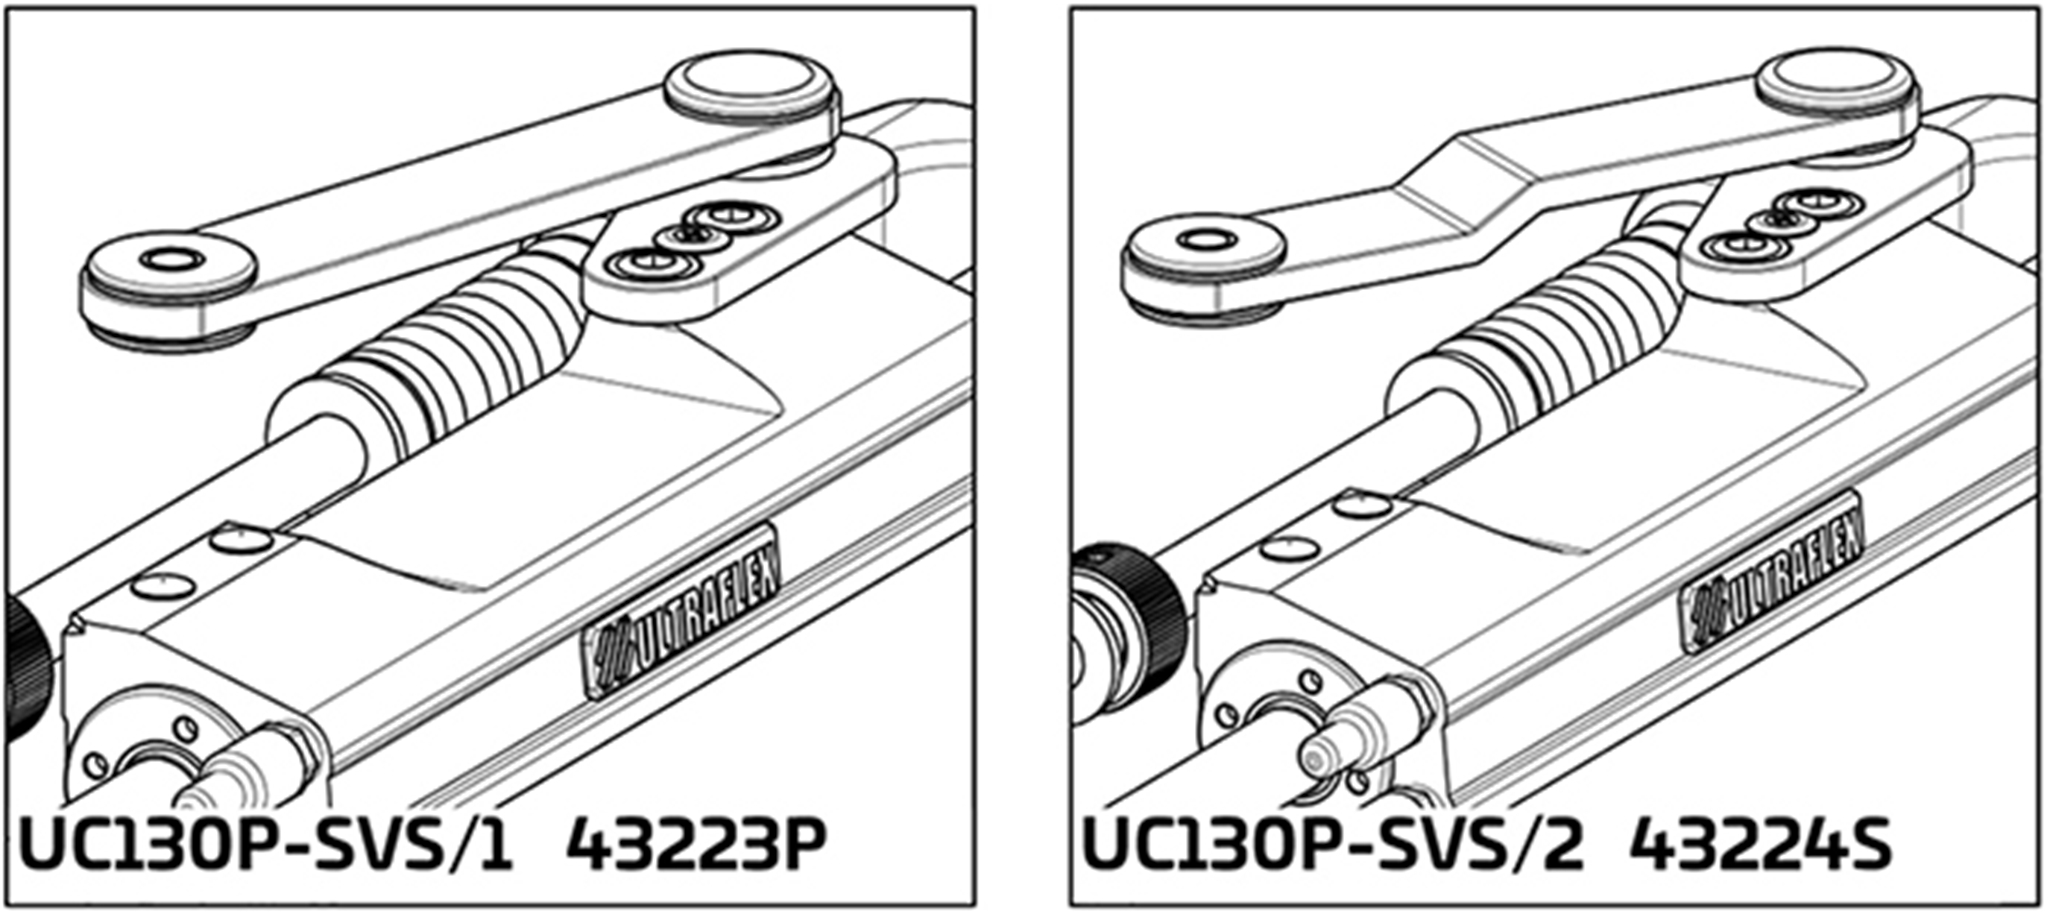 UC130 SVS Hydraulic Port Cylinder Application 1 and 2